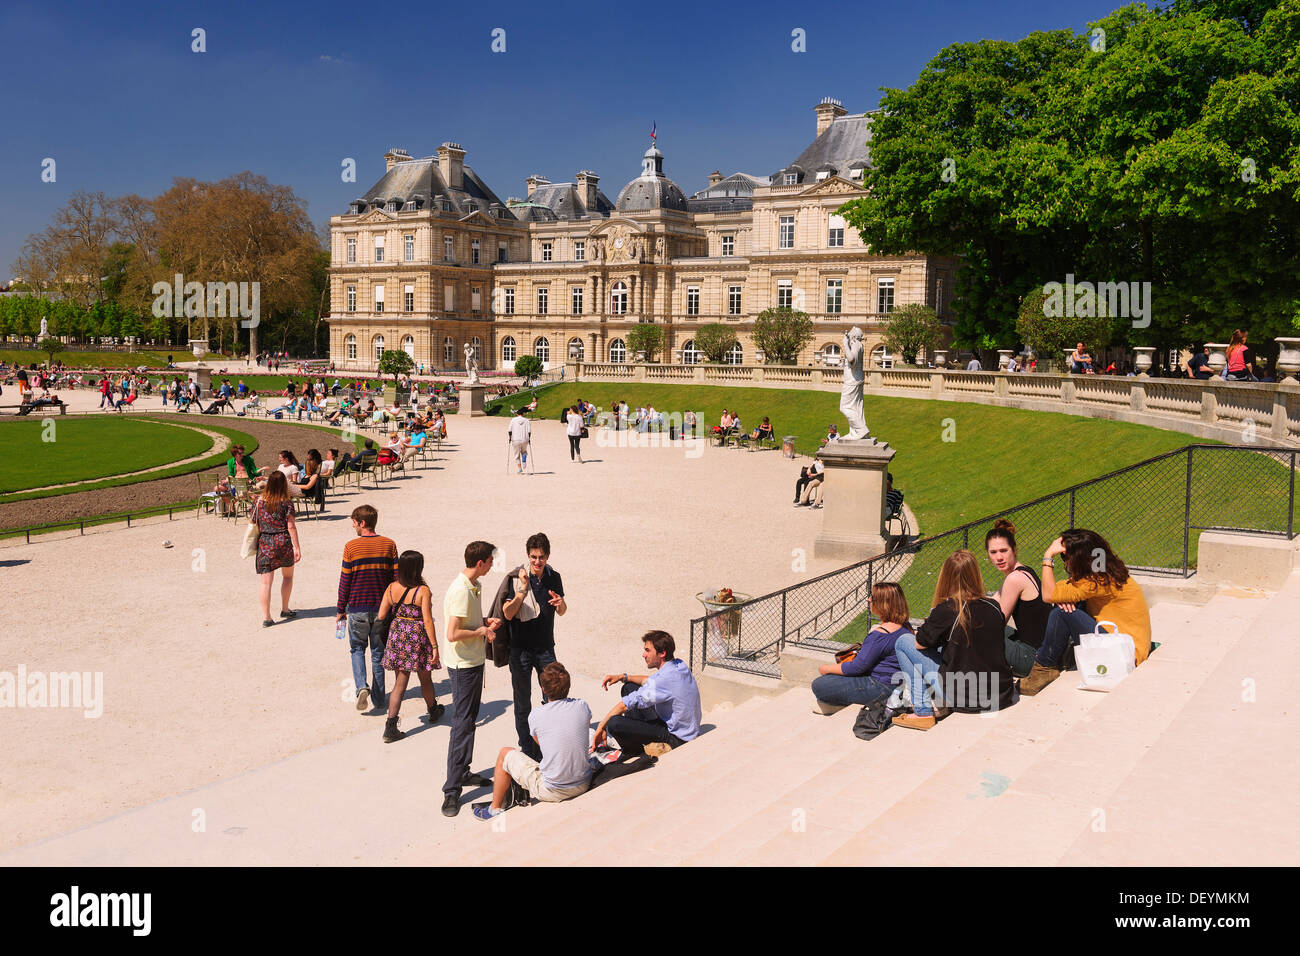 Palais du Luxembourg, Luxembourg Palace in the Jardin du Luxembourg, seat of the French Senate, Paris, Ile-de-France, France Stock Photo